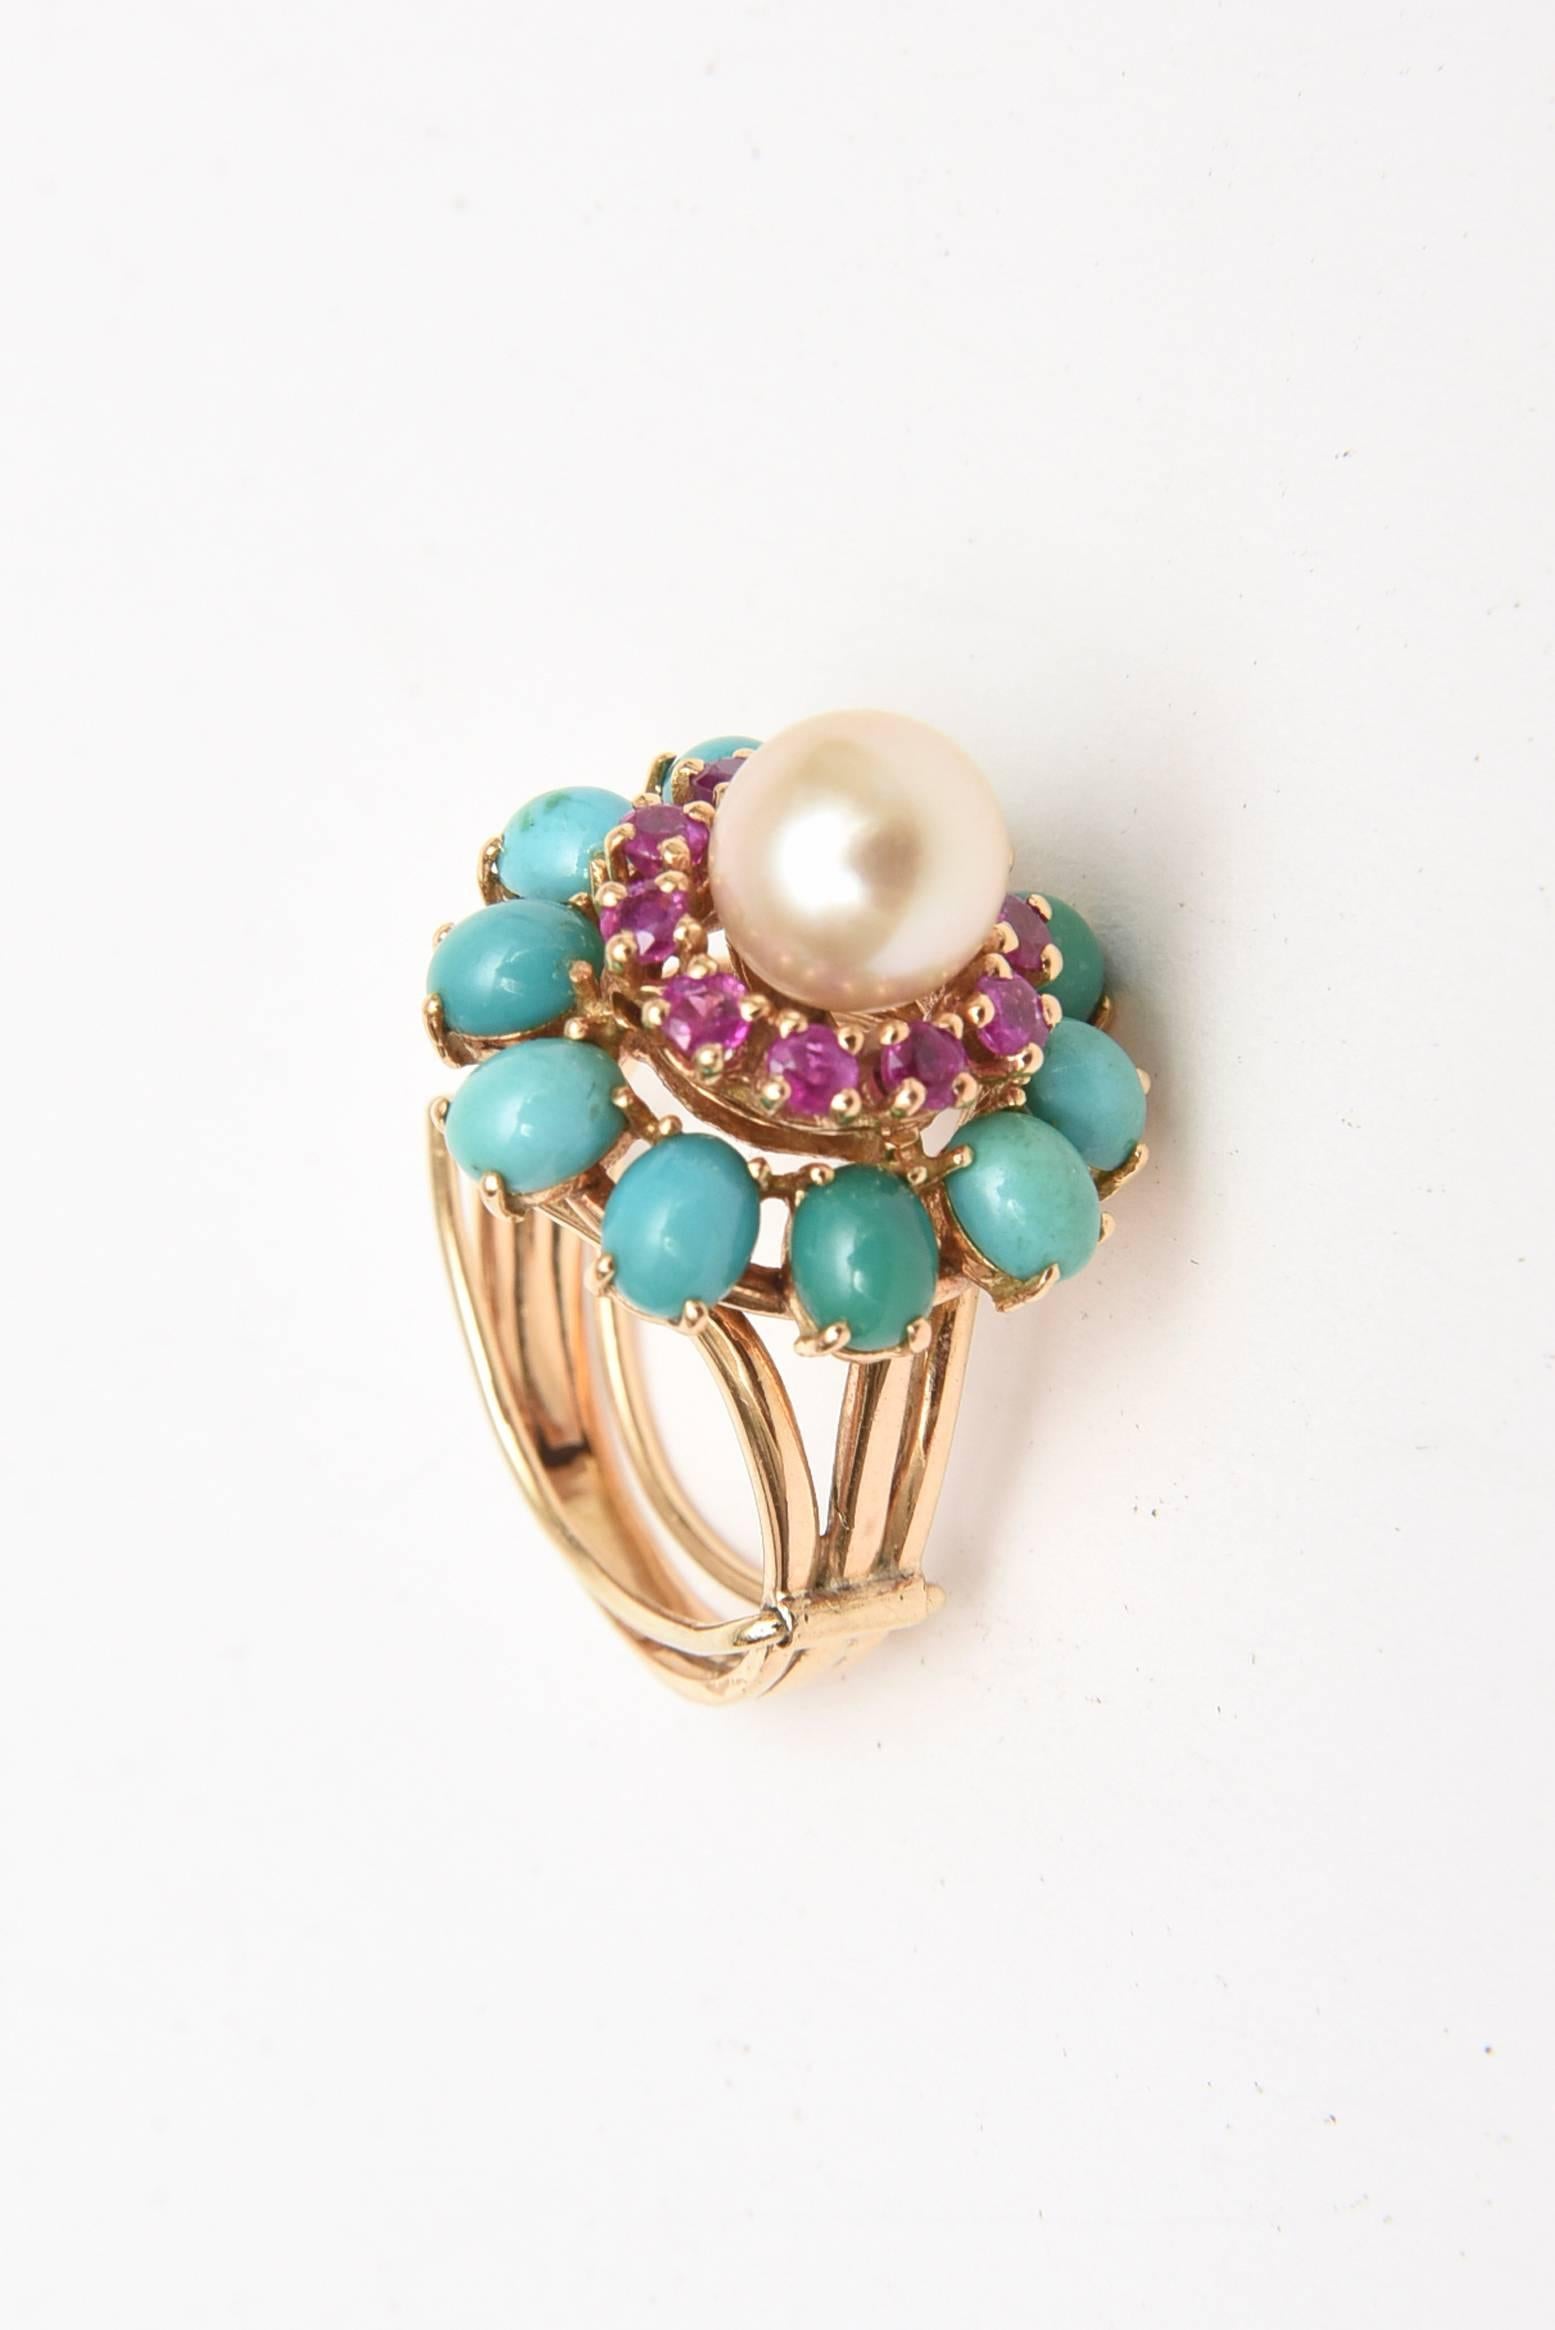 This lovely dome cocktail ring of 14K yellow gold has 10 oval cabochon cut turquoise stones prong set that are preceded by 10 ruby stones of 2.4 millimeter each. The cultured pearl is in the center. It is 7.2 DWT. The ring size is 6.5. This is from